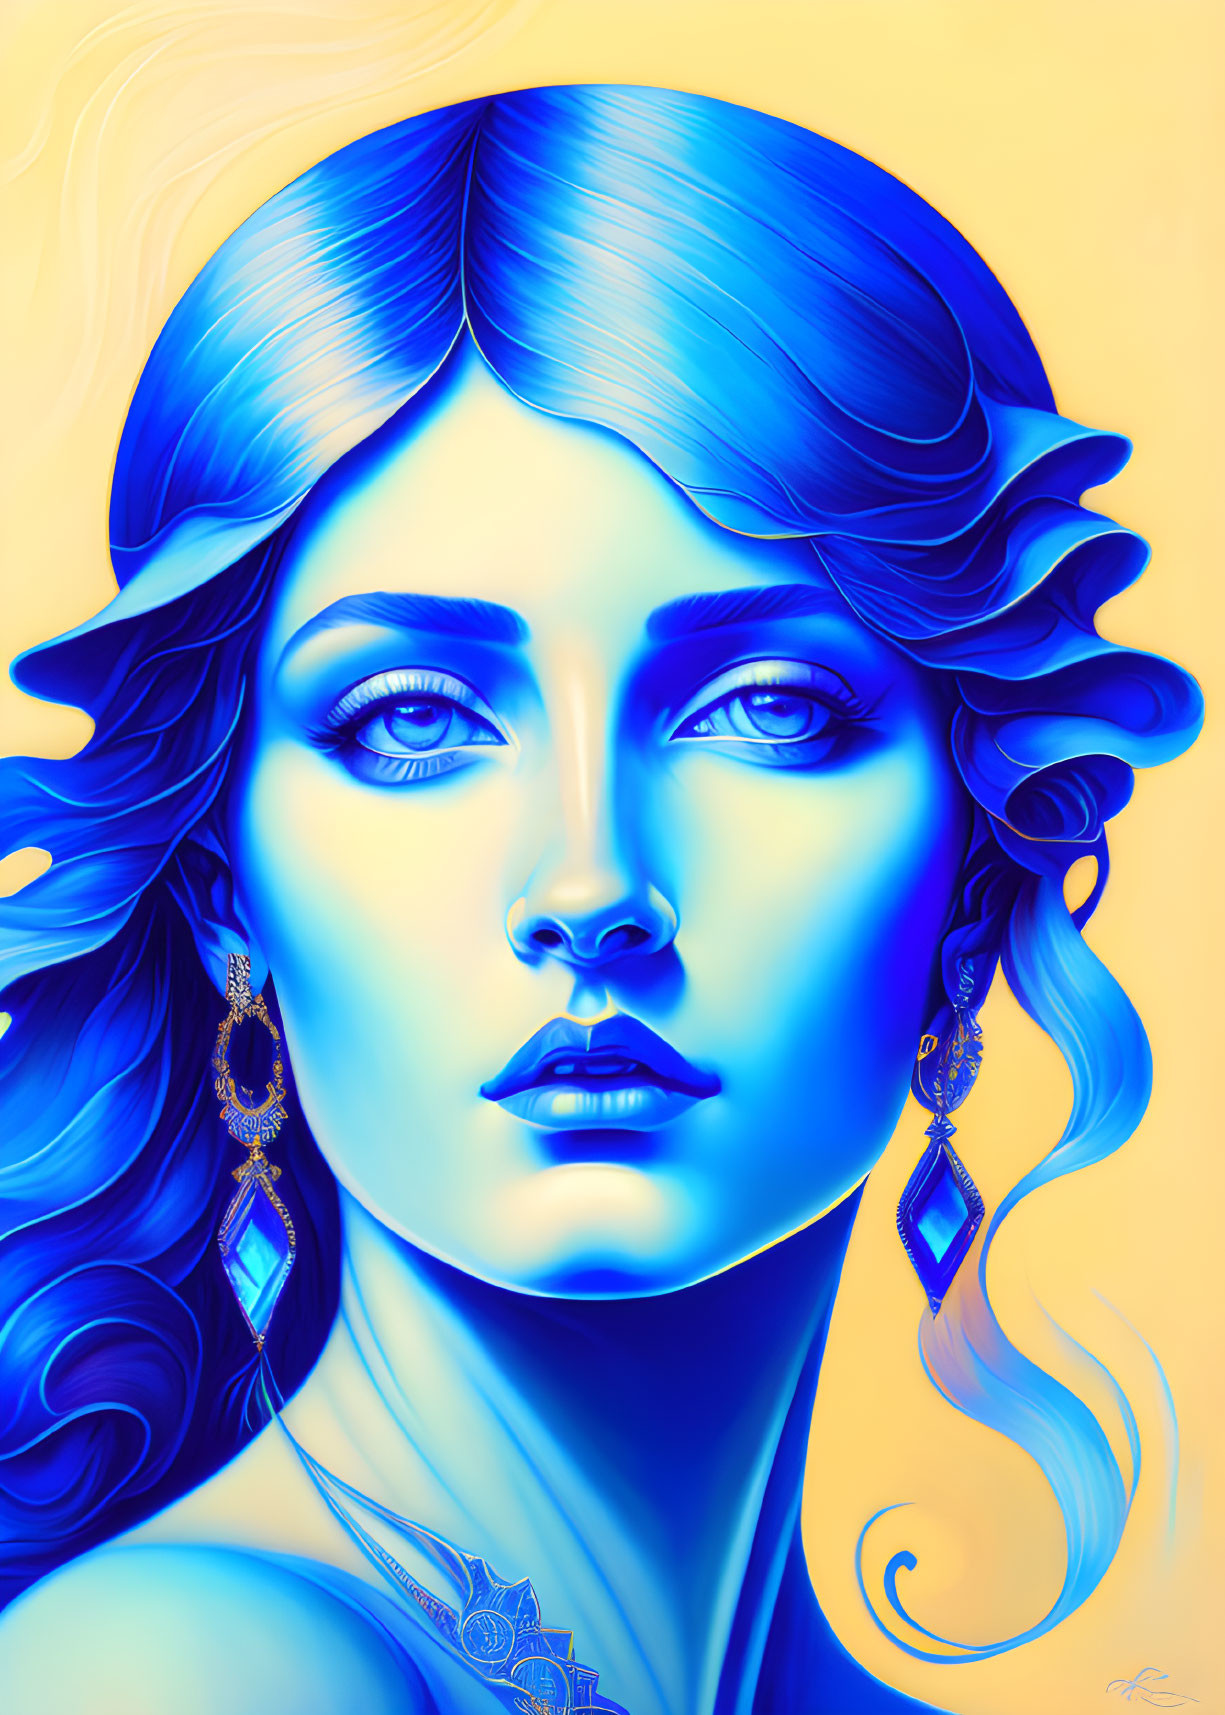 Detailed digital portrait of woman with blue skin and wavy hair against yellow background